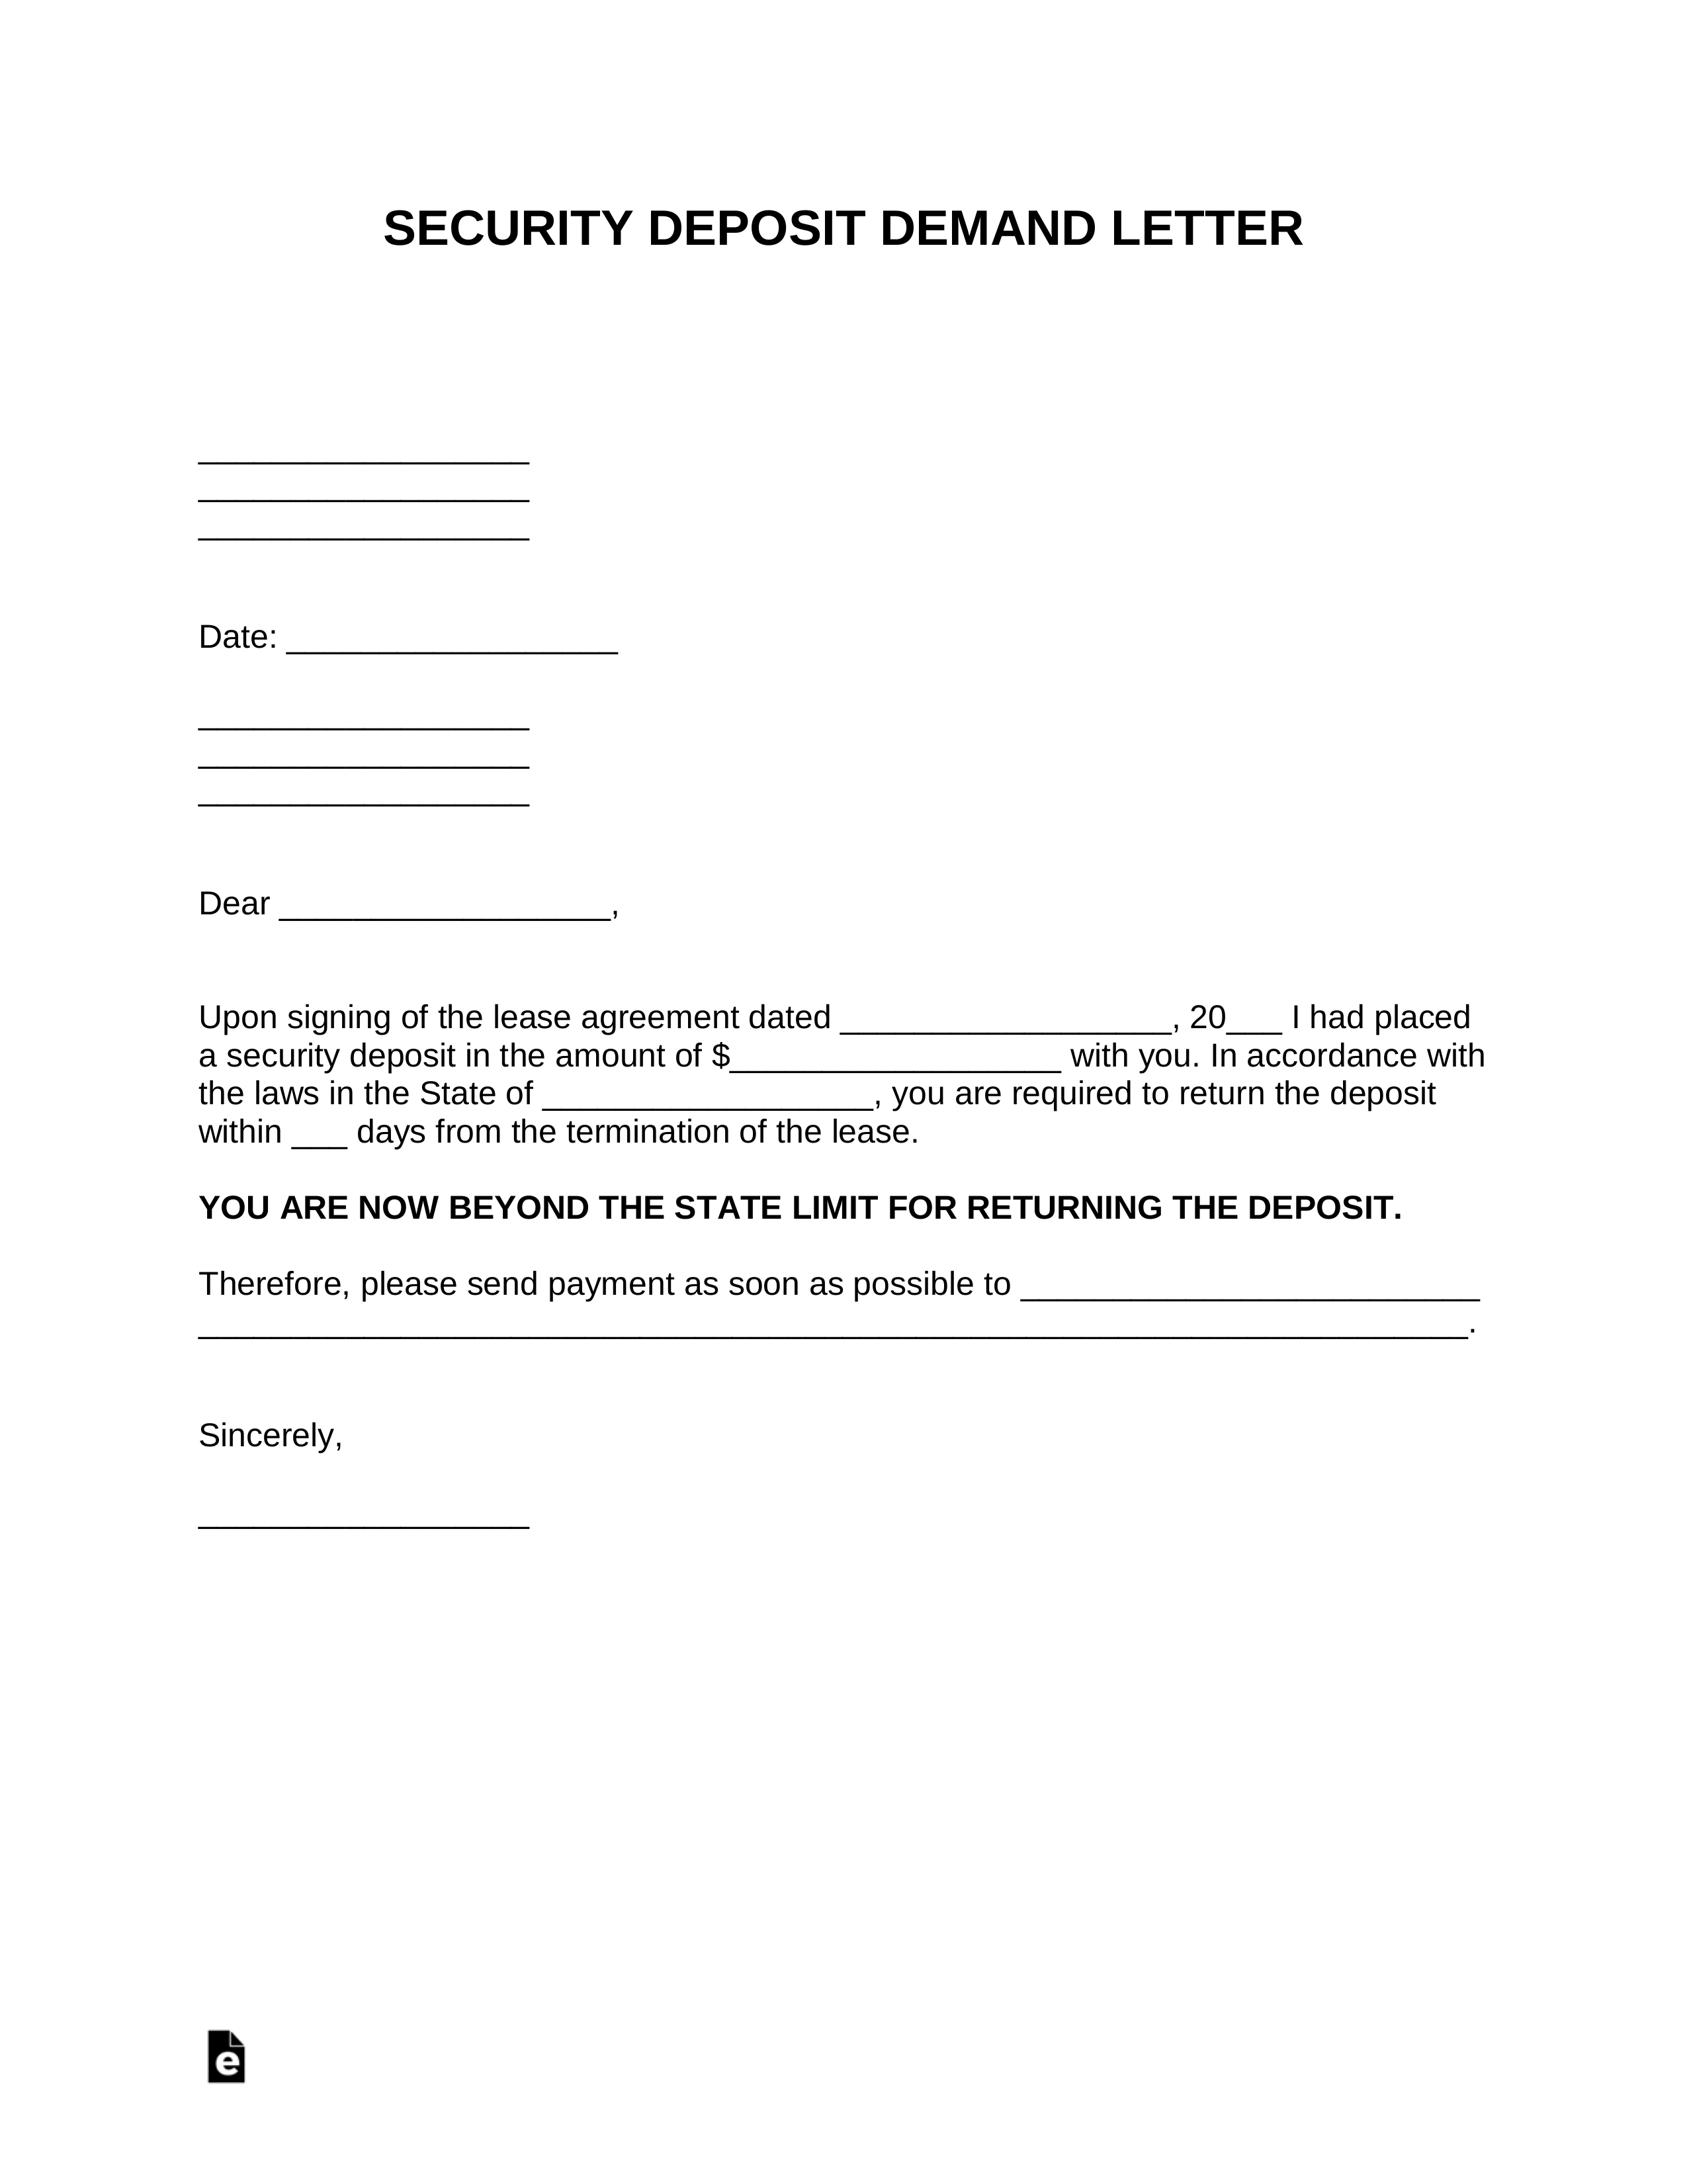 Free Security Deposit Demand Letter Template - PDF  Word – eForms For Security Deposit Demand Letter Template With Security Deposit Demand Letter Template